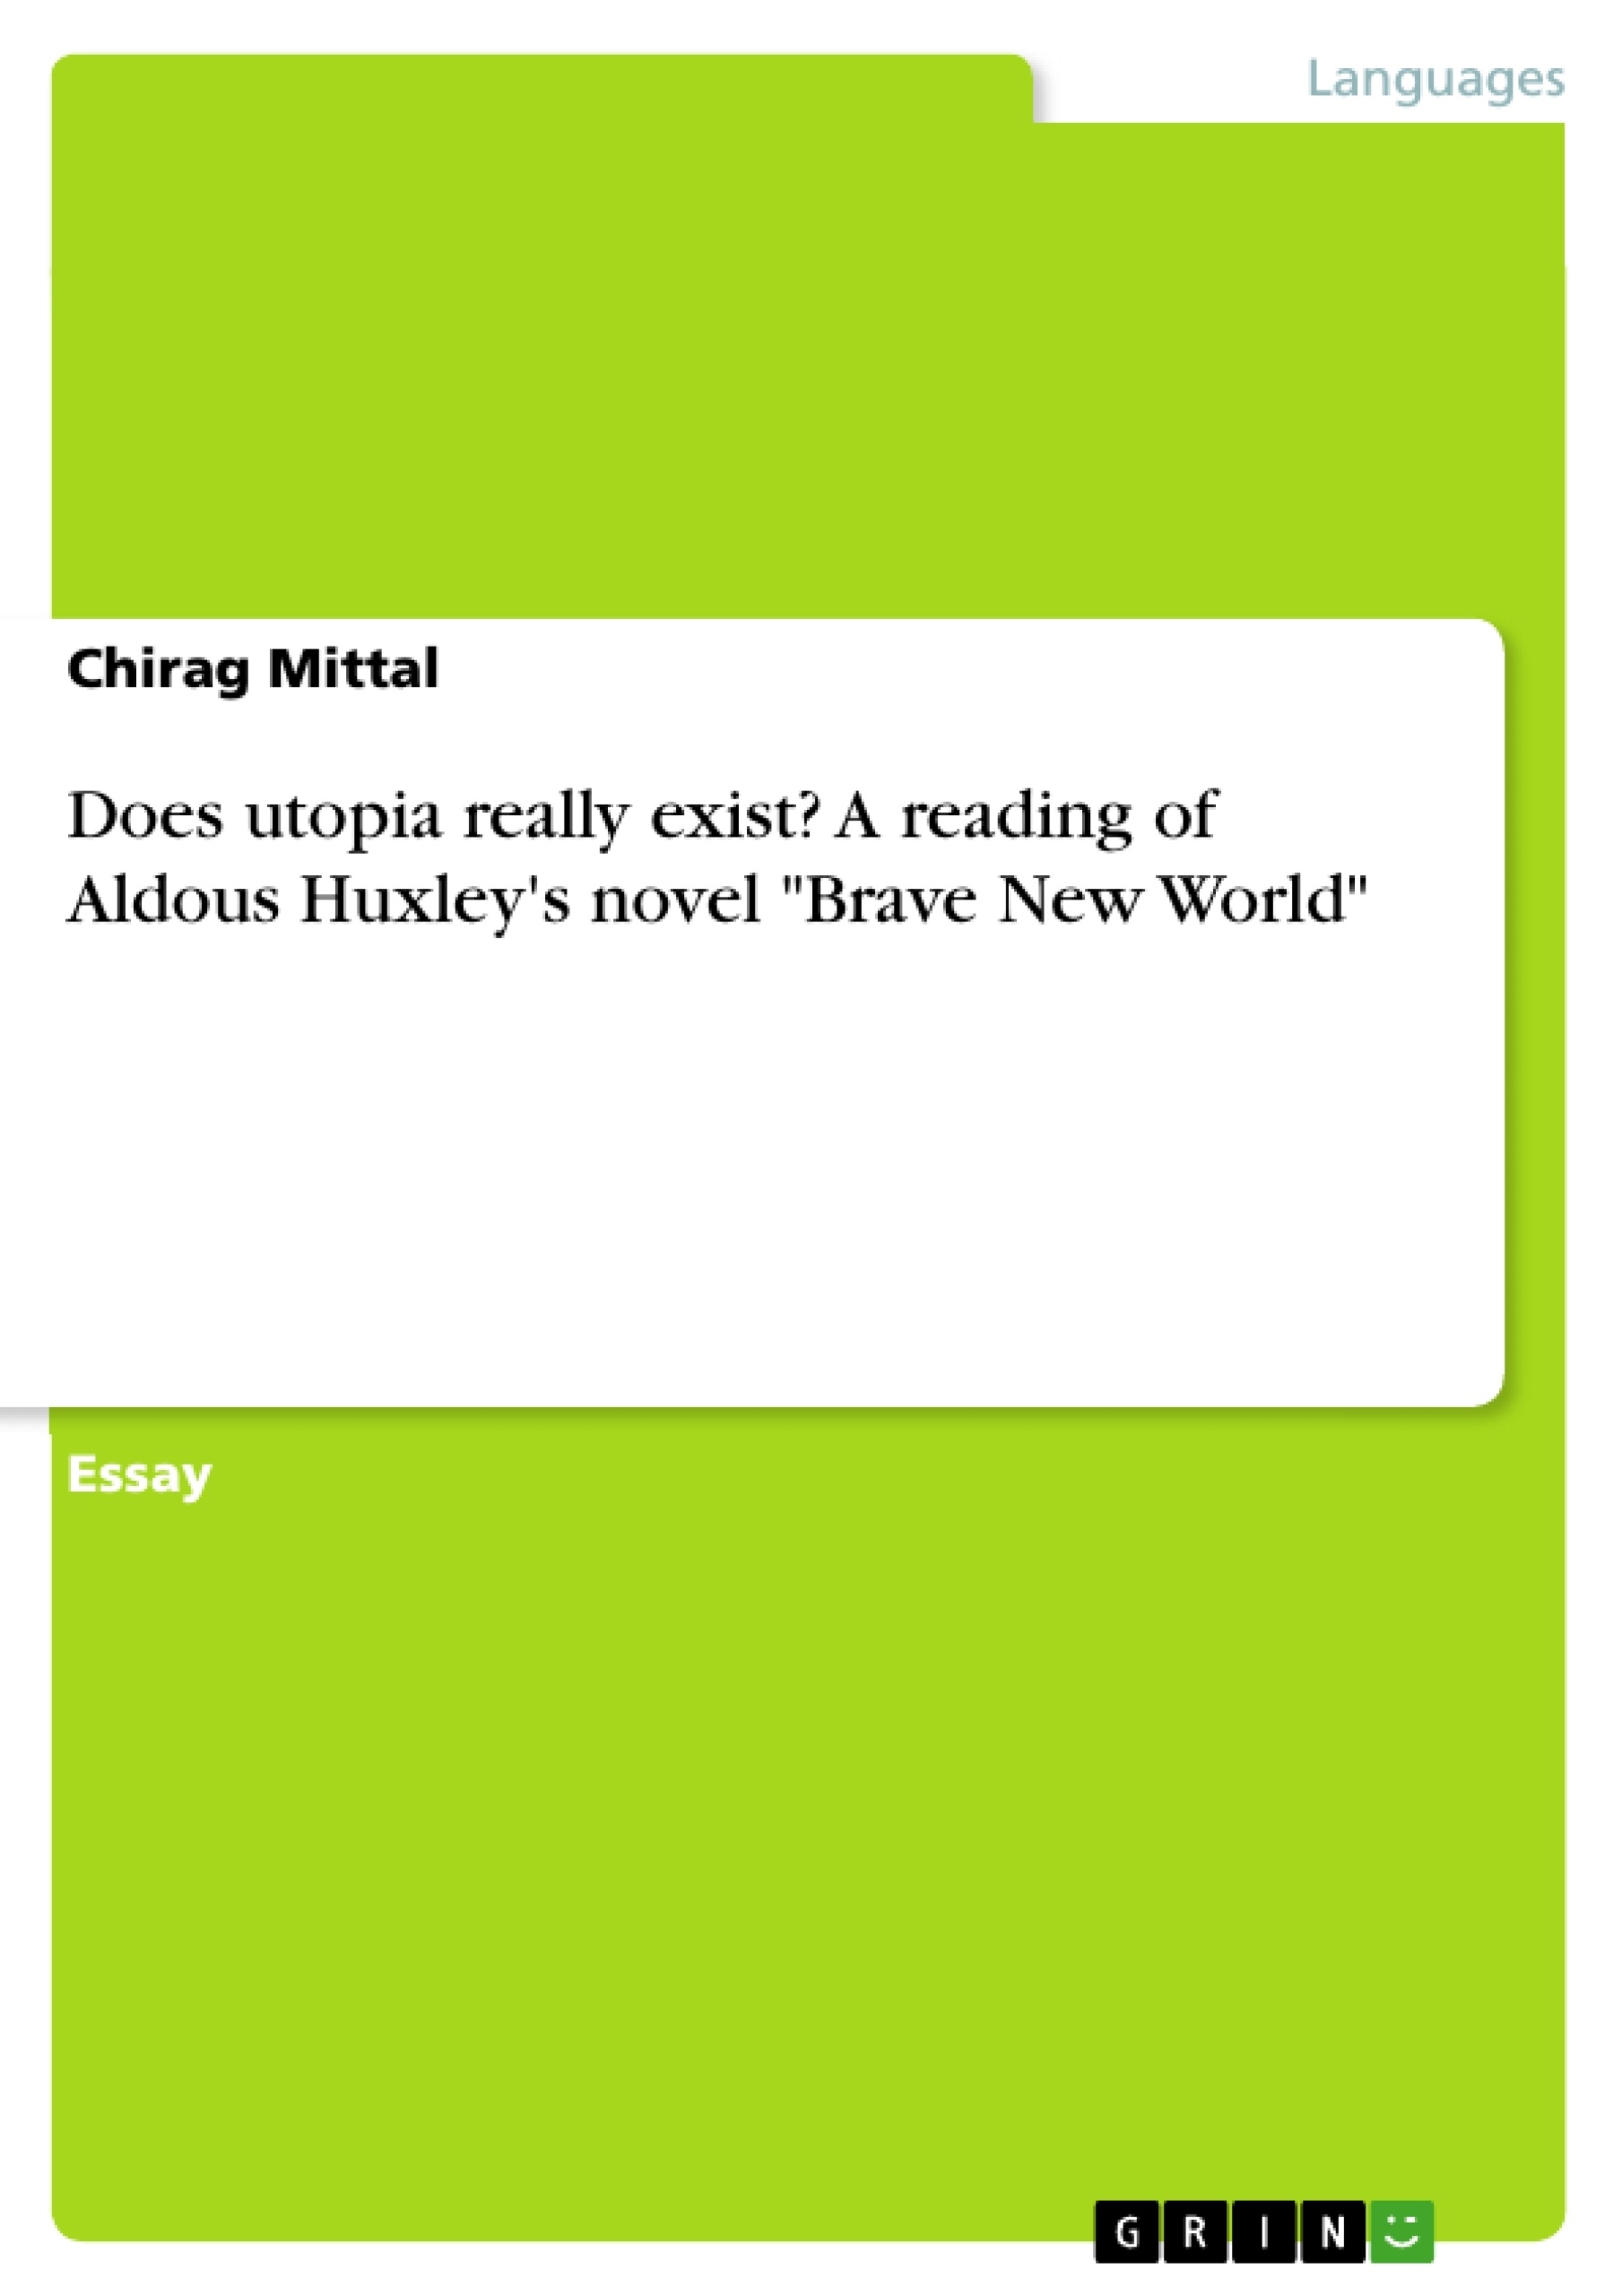 Title: Does utopia really exist? A reading of Aldous Huxley's novel "Brave New World"